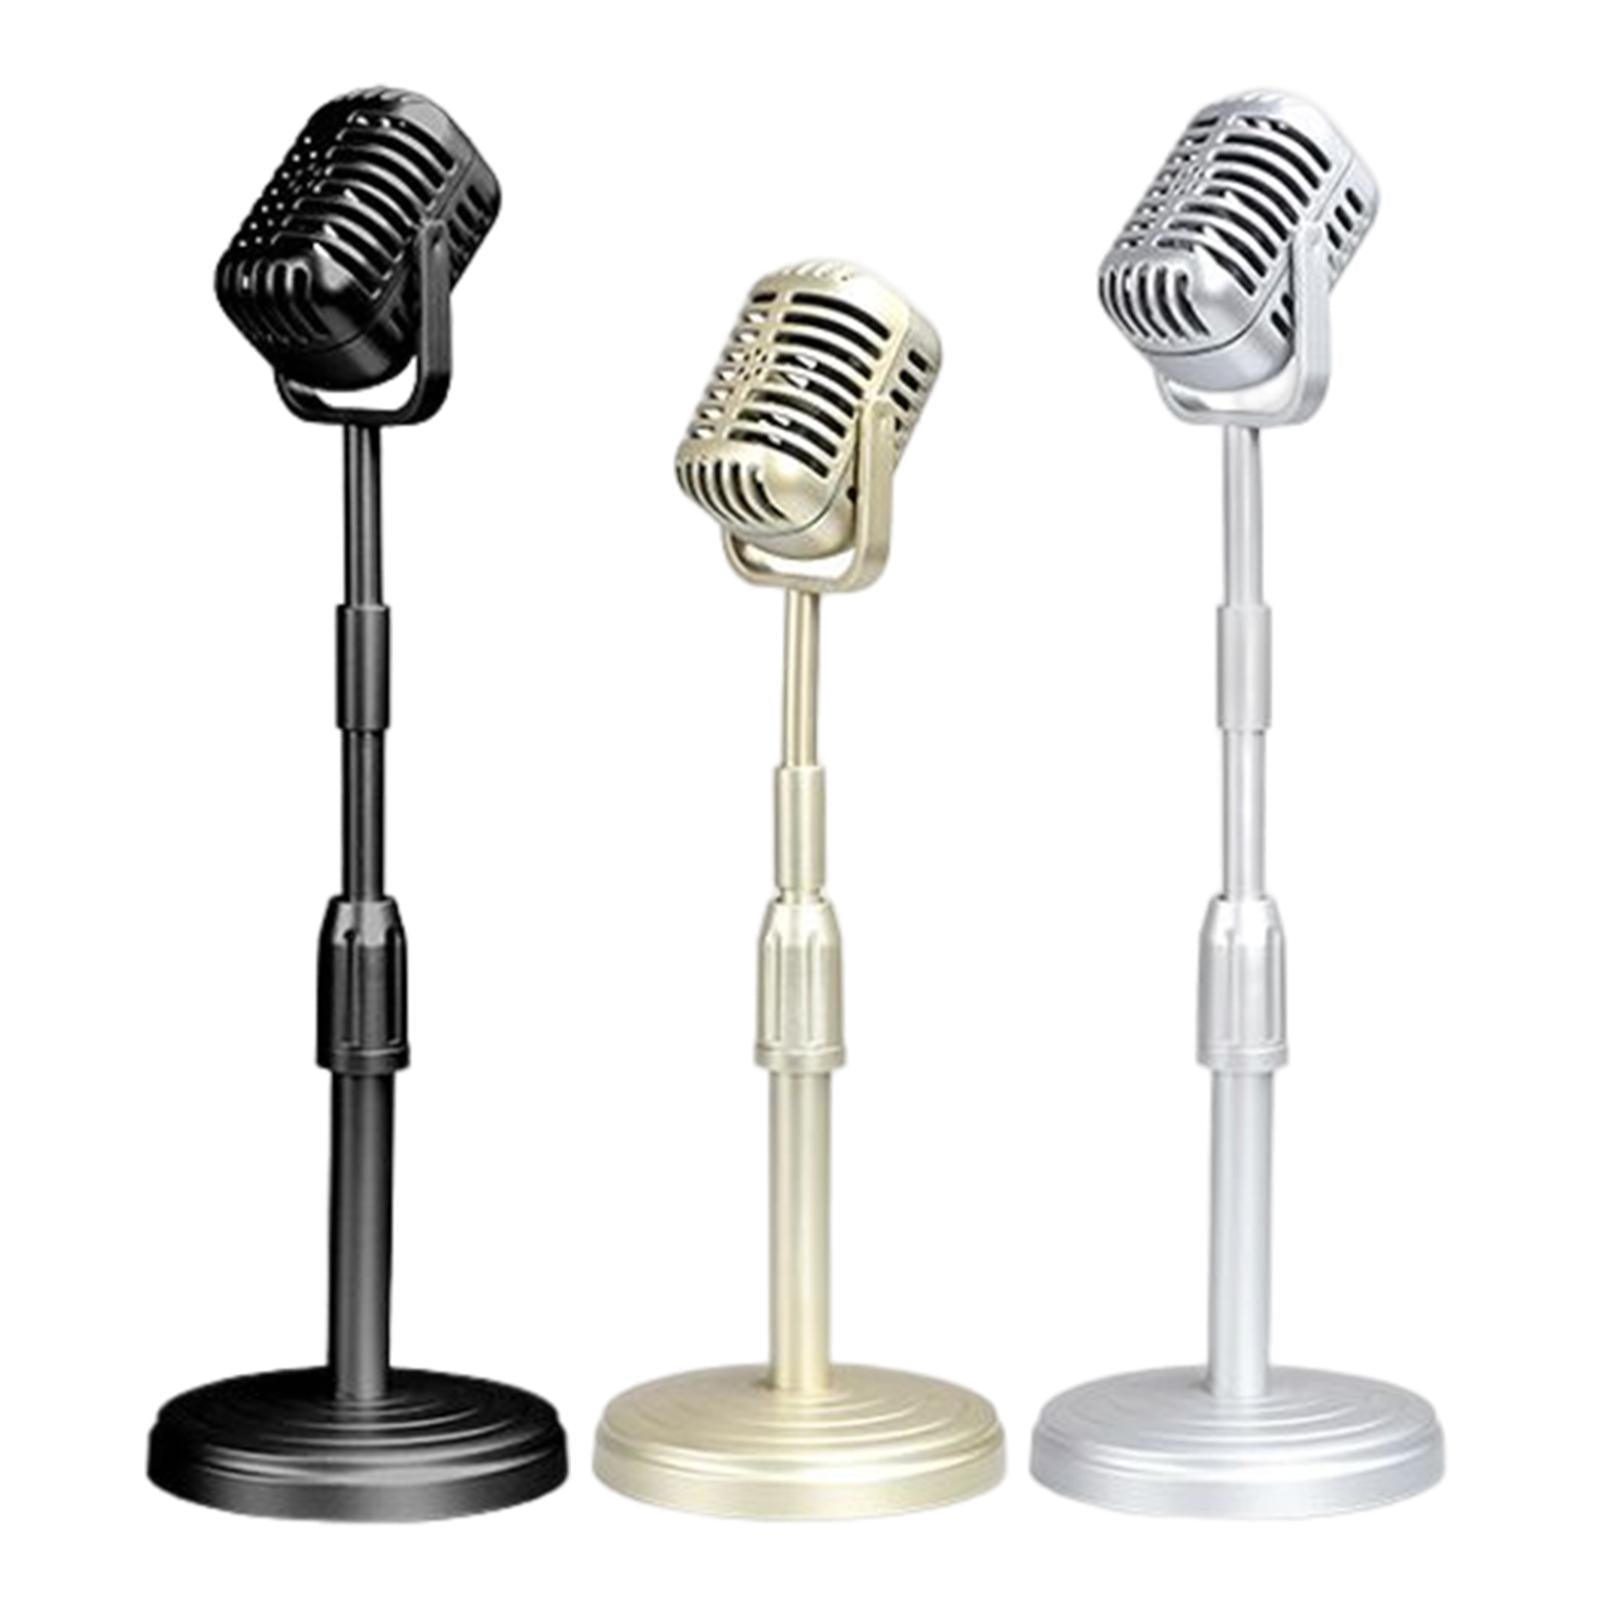 Simulation Classic Retro Vintage Style Mic Prop Photography with Stand Black